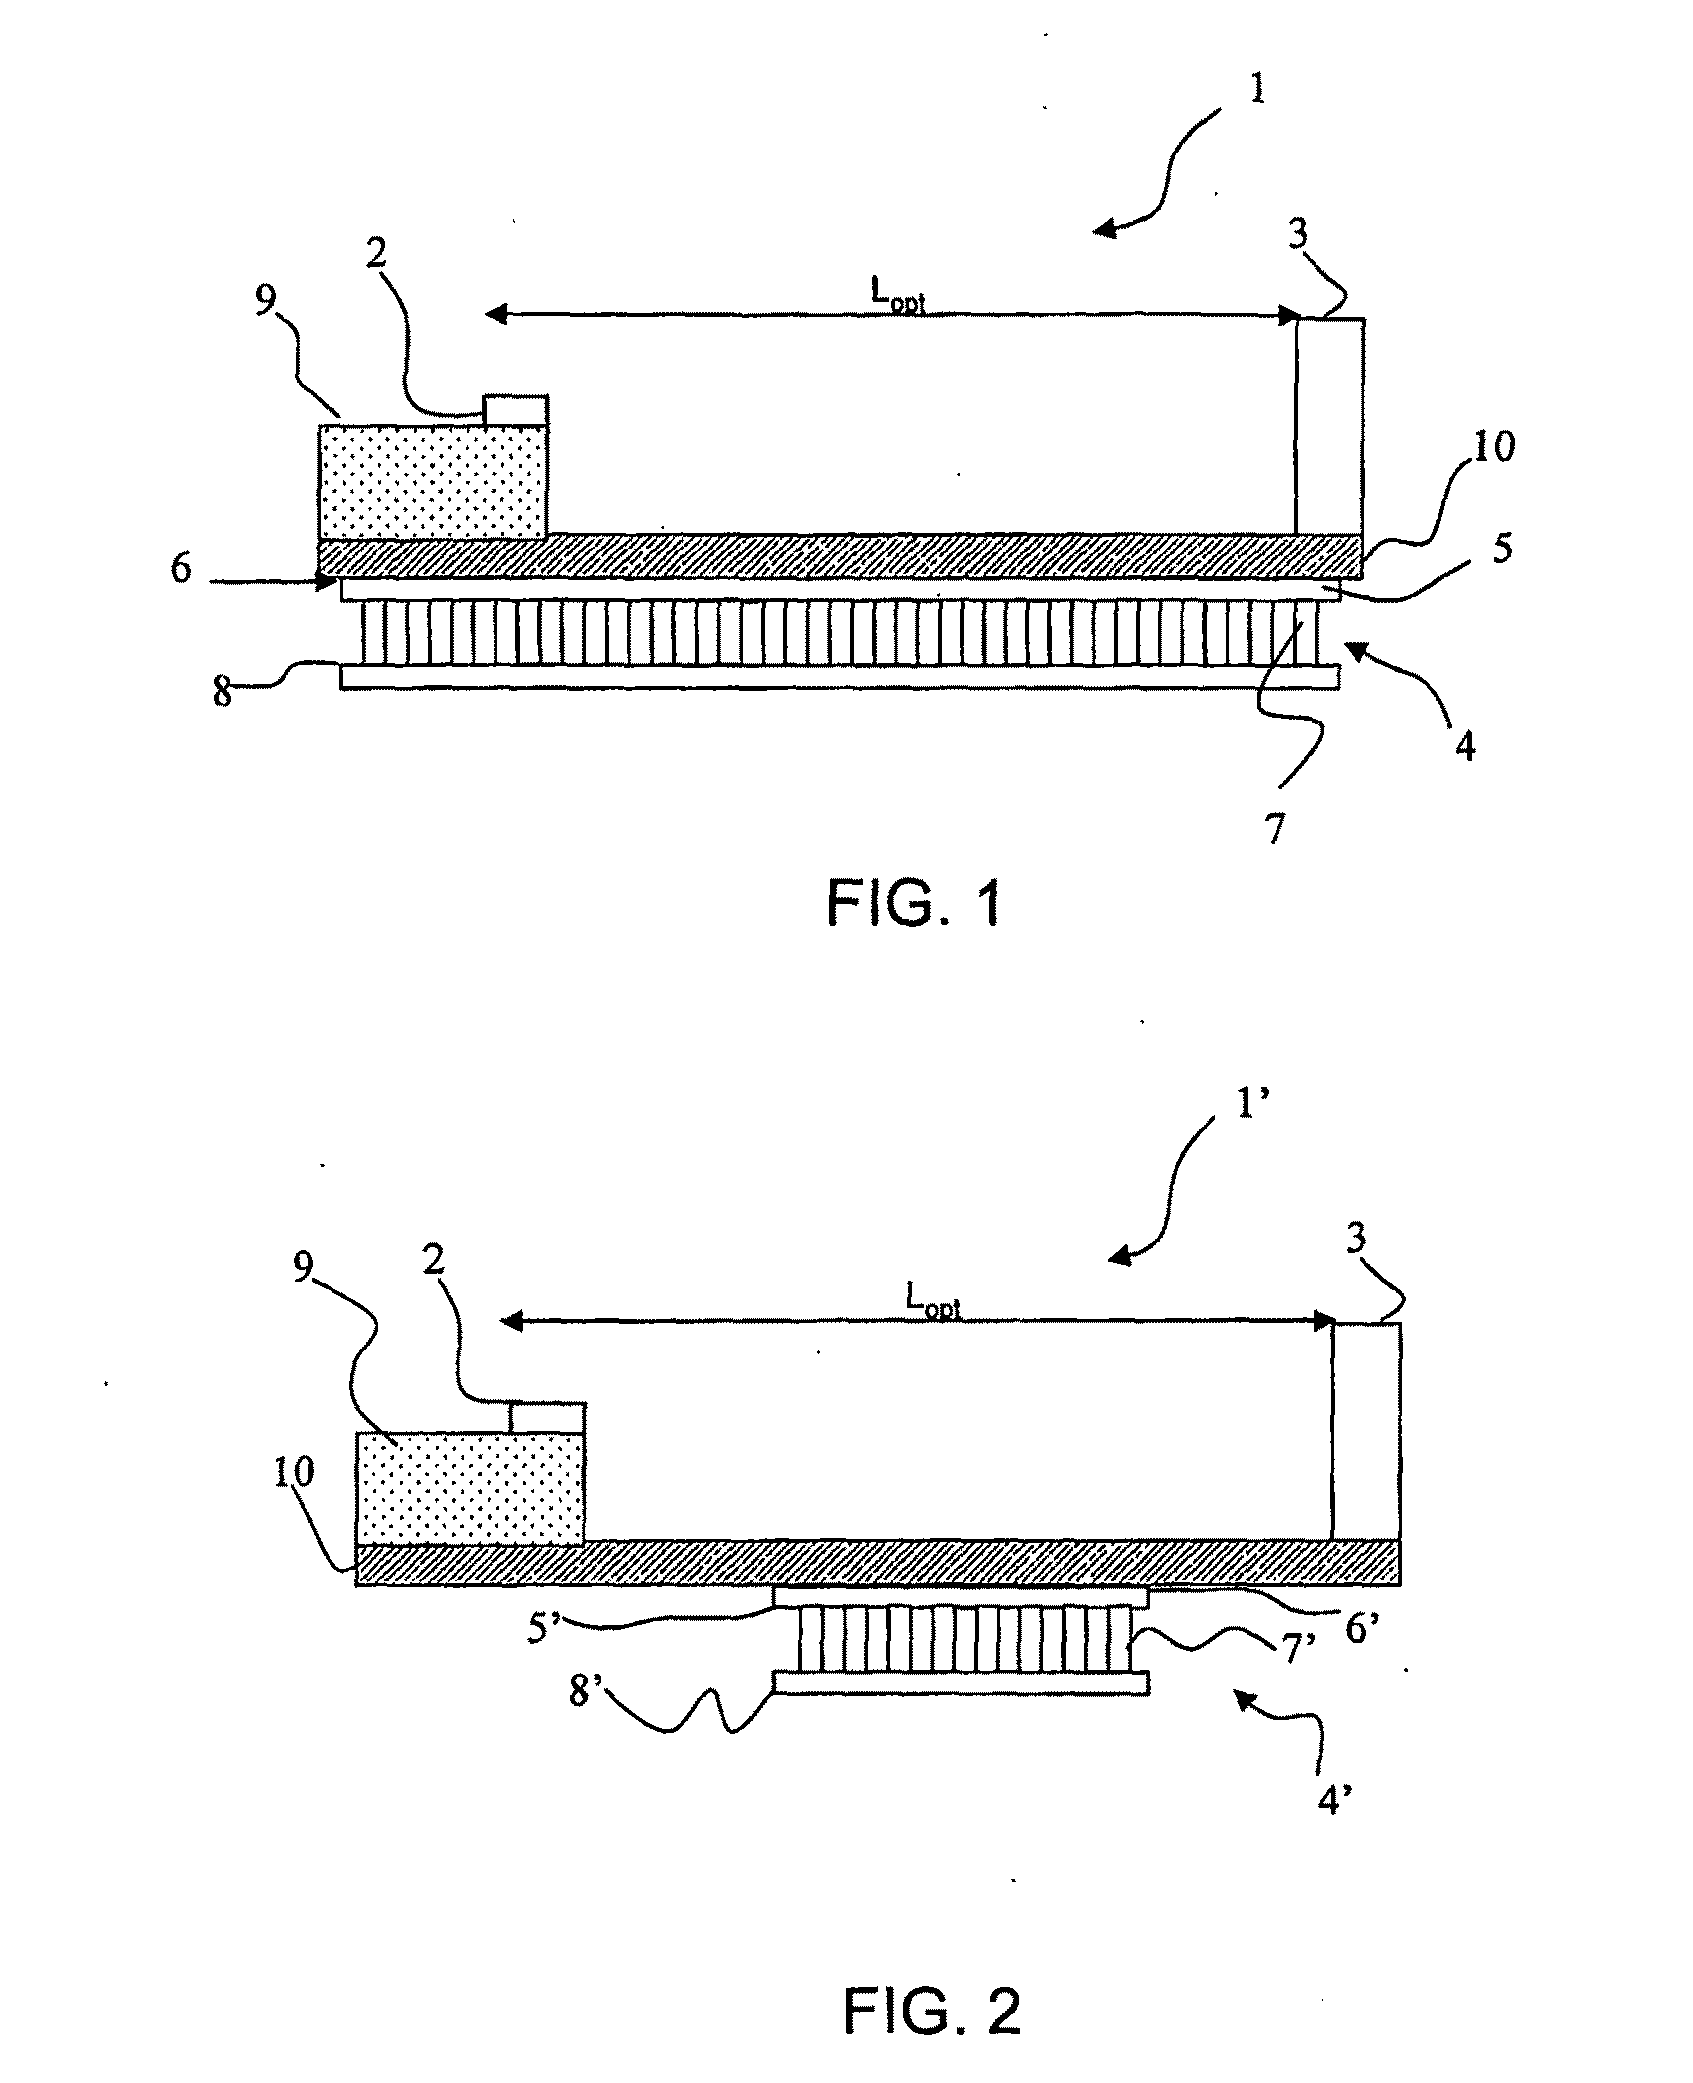 Passive Phase Control in an External Cavity Laser